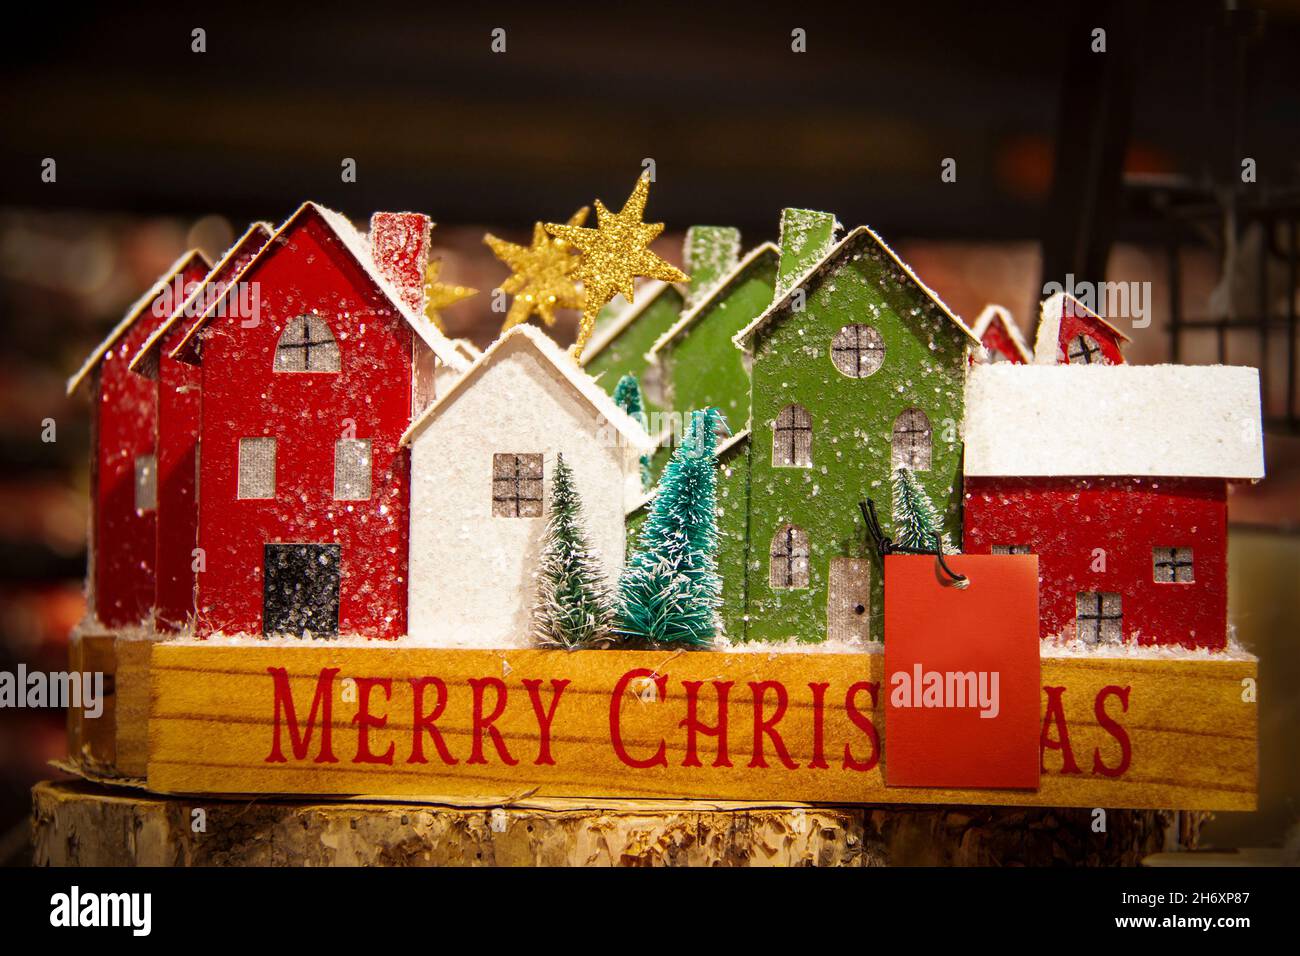 Wooden Christmas village - glittery decor red and green and white houses in Merry Christmas box against blurred background with blank card for message Stock Photo